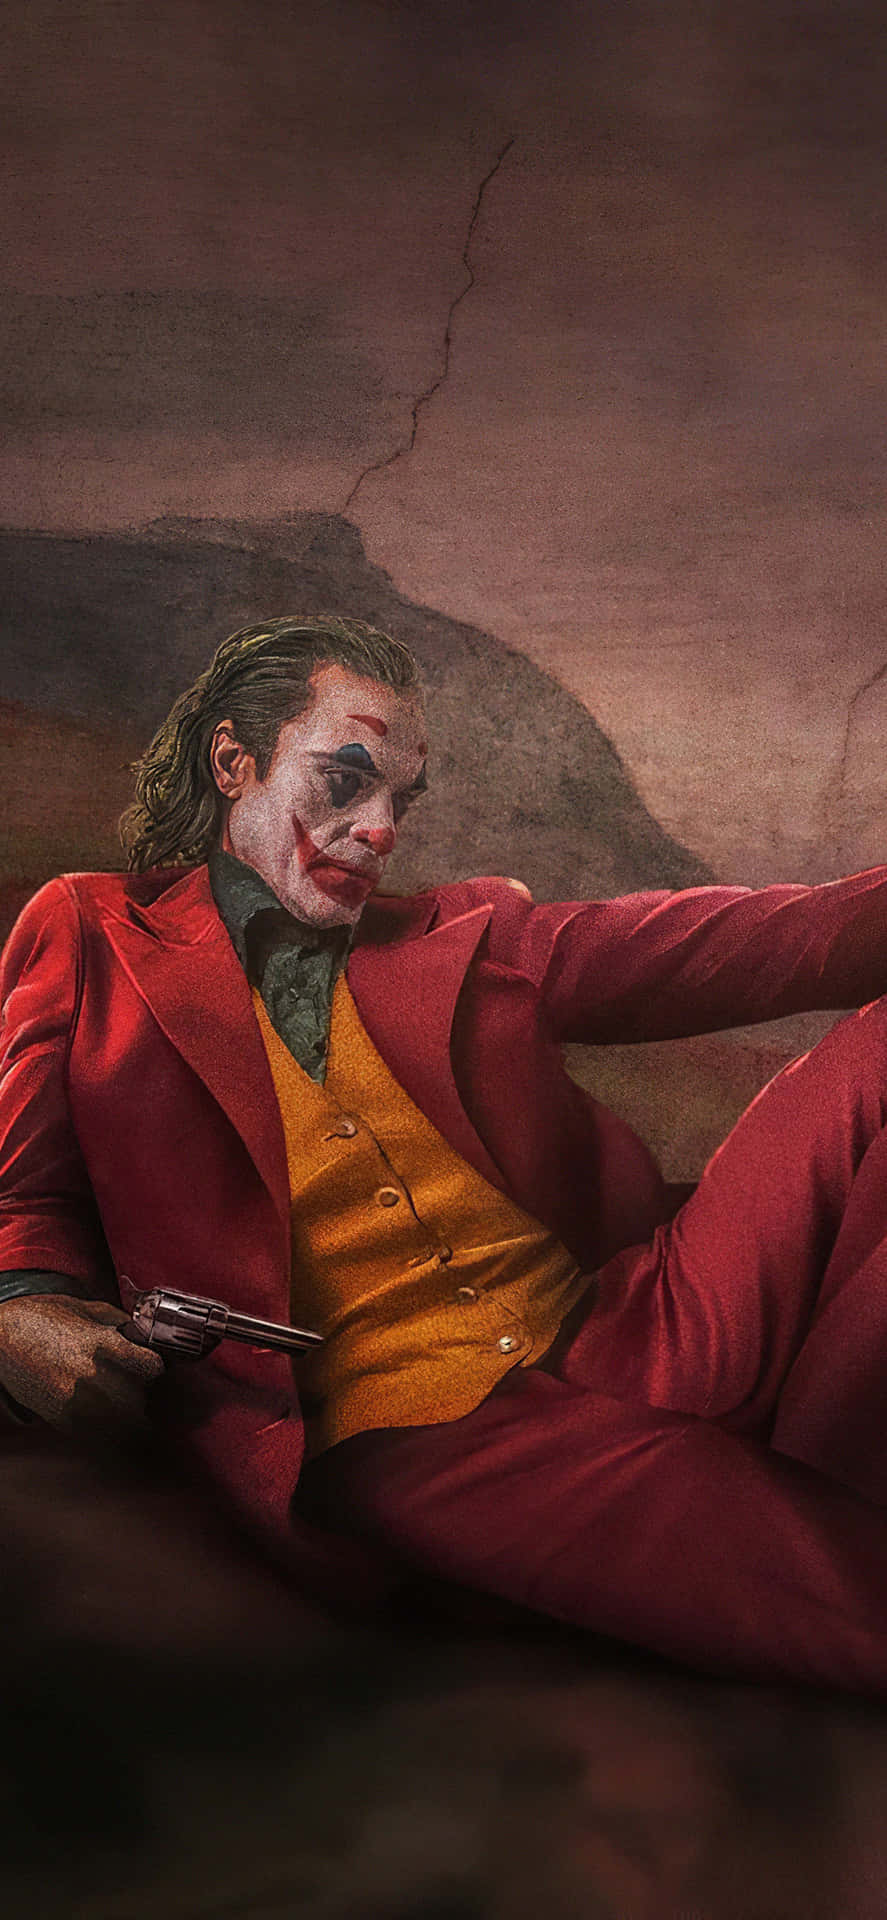  Joker Hintergrundbild 887x1920. Download • A mysterious and whimsical portrayal of the iconic Joker. Wallpaper